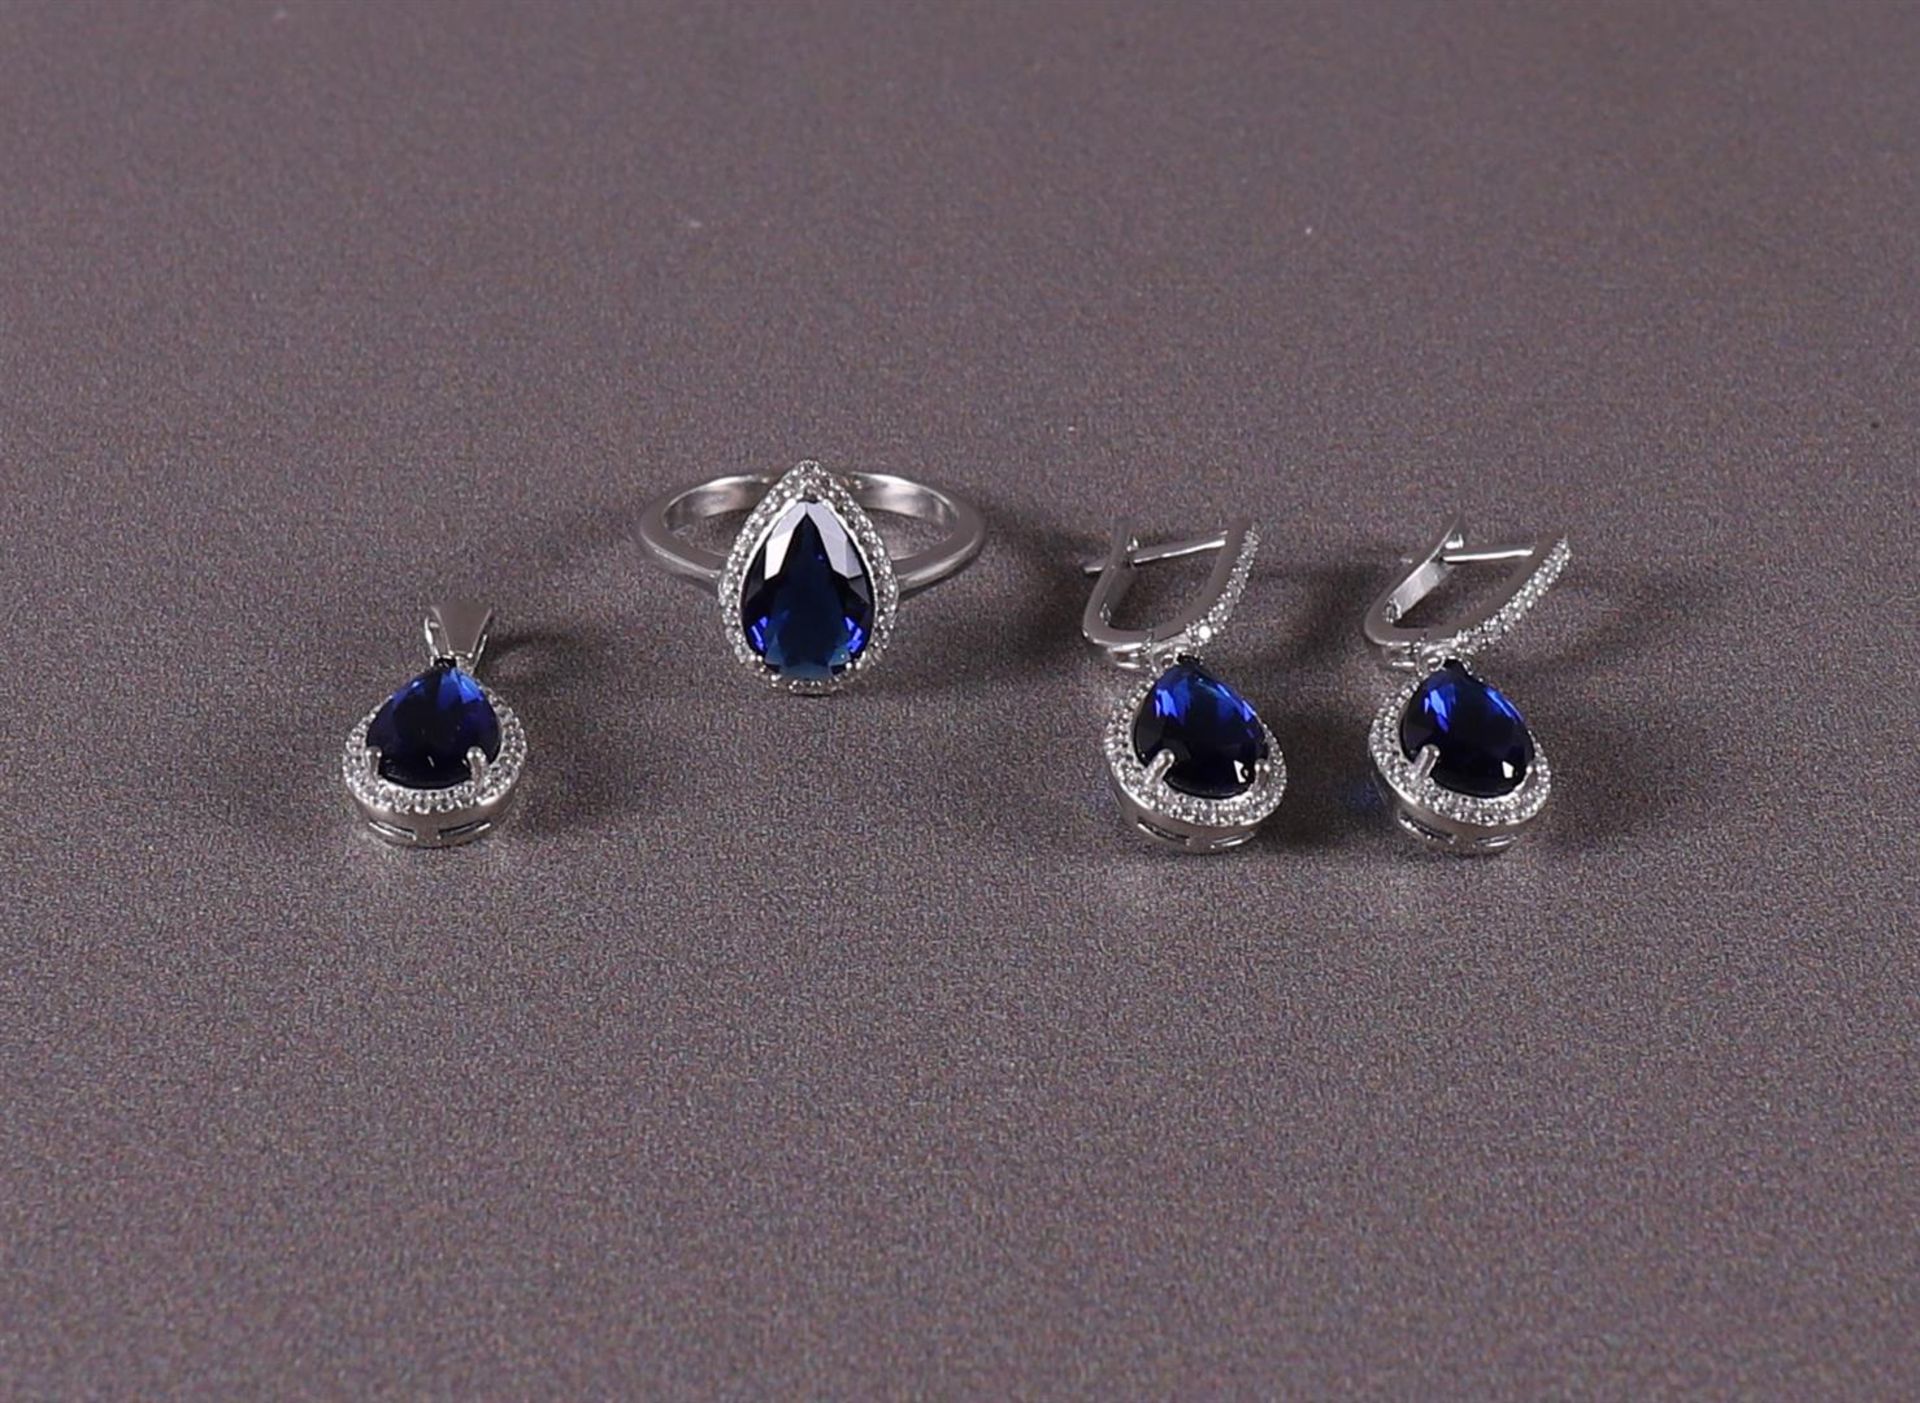 A 1st grade silver ring, earrings and pendant with blue stones - Image 2 of 3